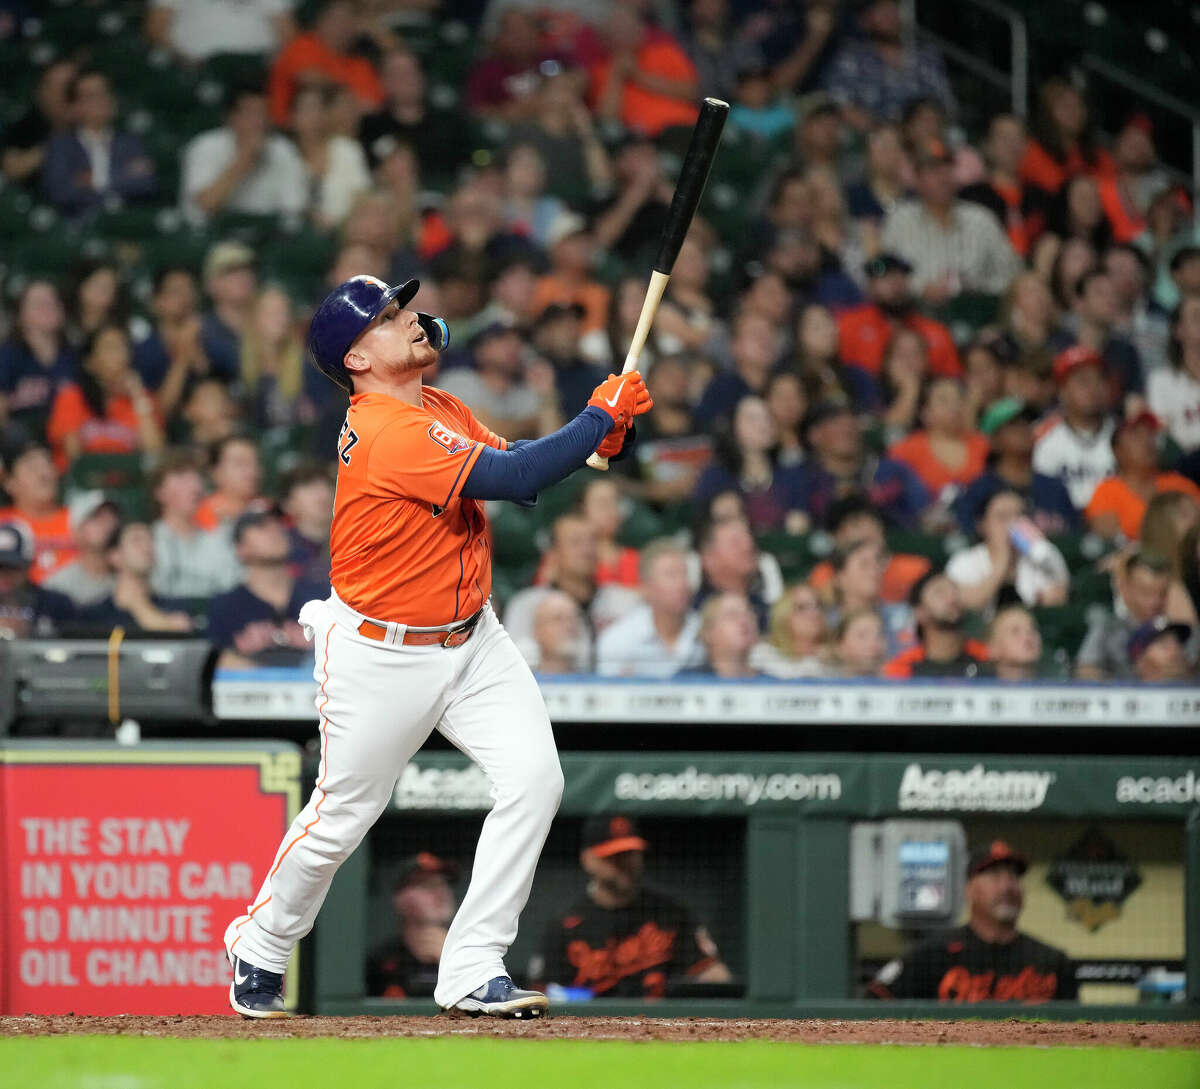 Houston Astros blanked by Baltimore Orioles in series opener